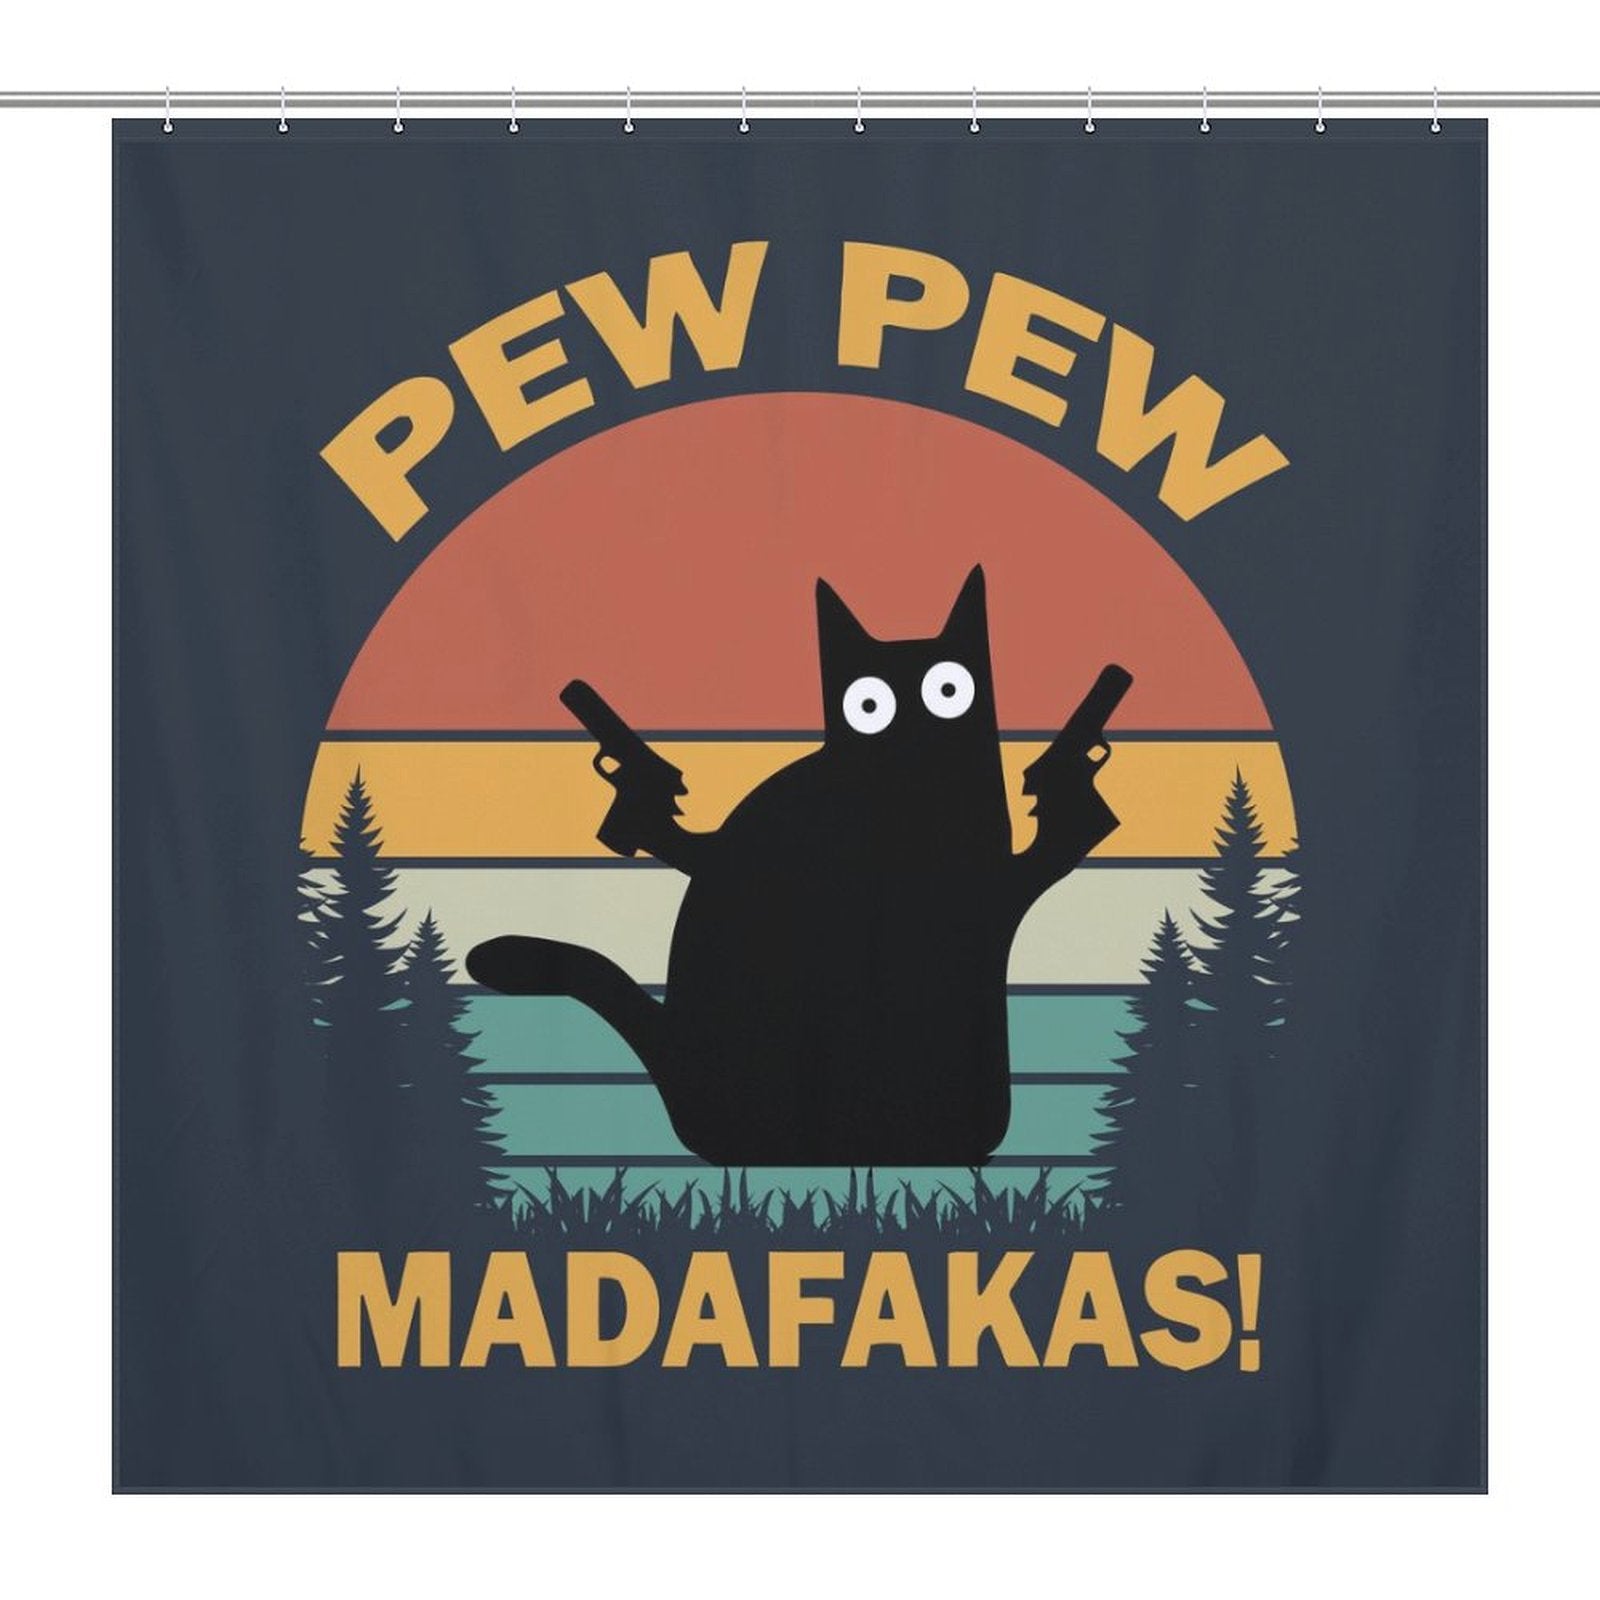 A black cat with two guns and the text "Pew Pew Madafakas!" against a retro sunset and forest background makes for a humorous **Funny Black Crazy Cat with Gun Shower Curtain-Cottoncat**, perfect for quirky bathroom decor by **Cotton Cat**.